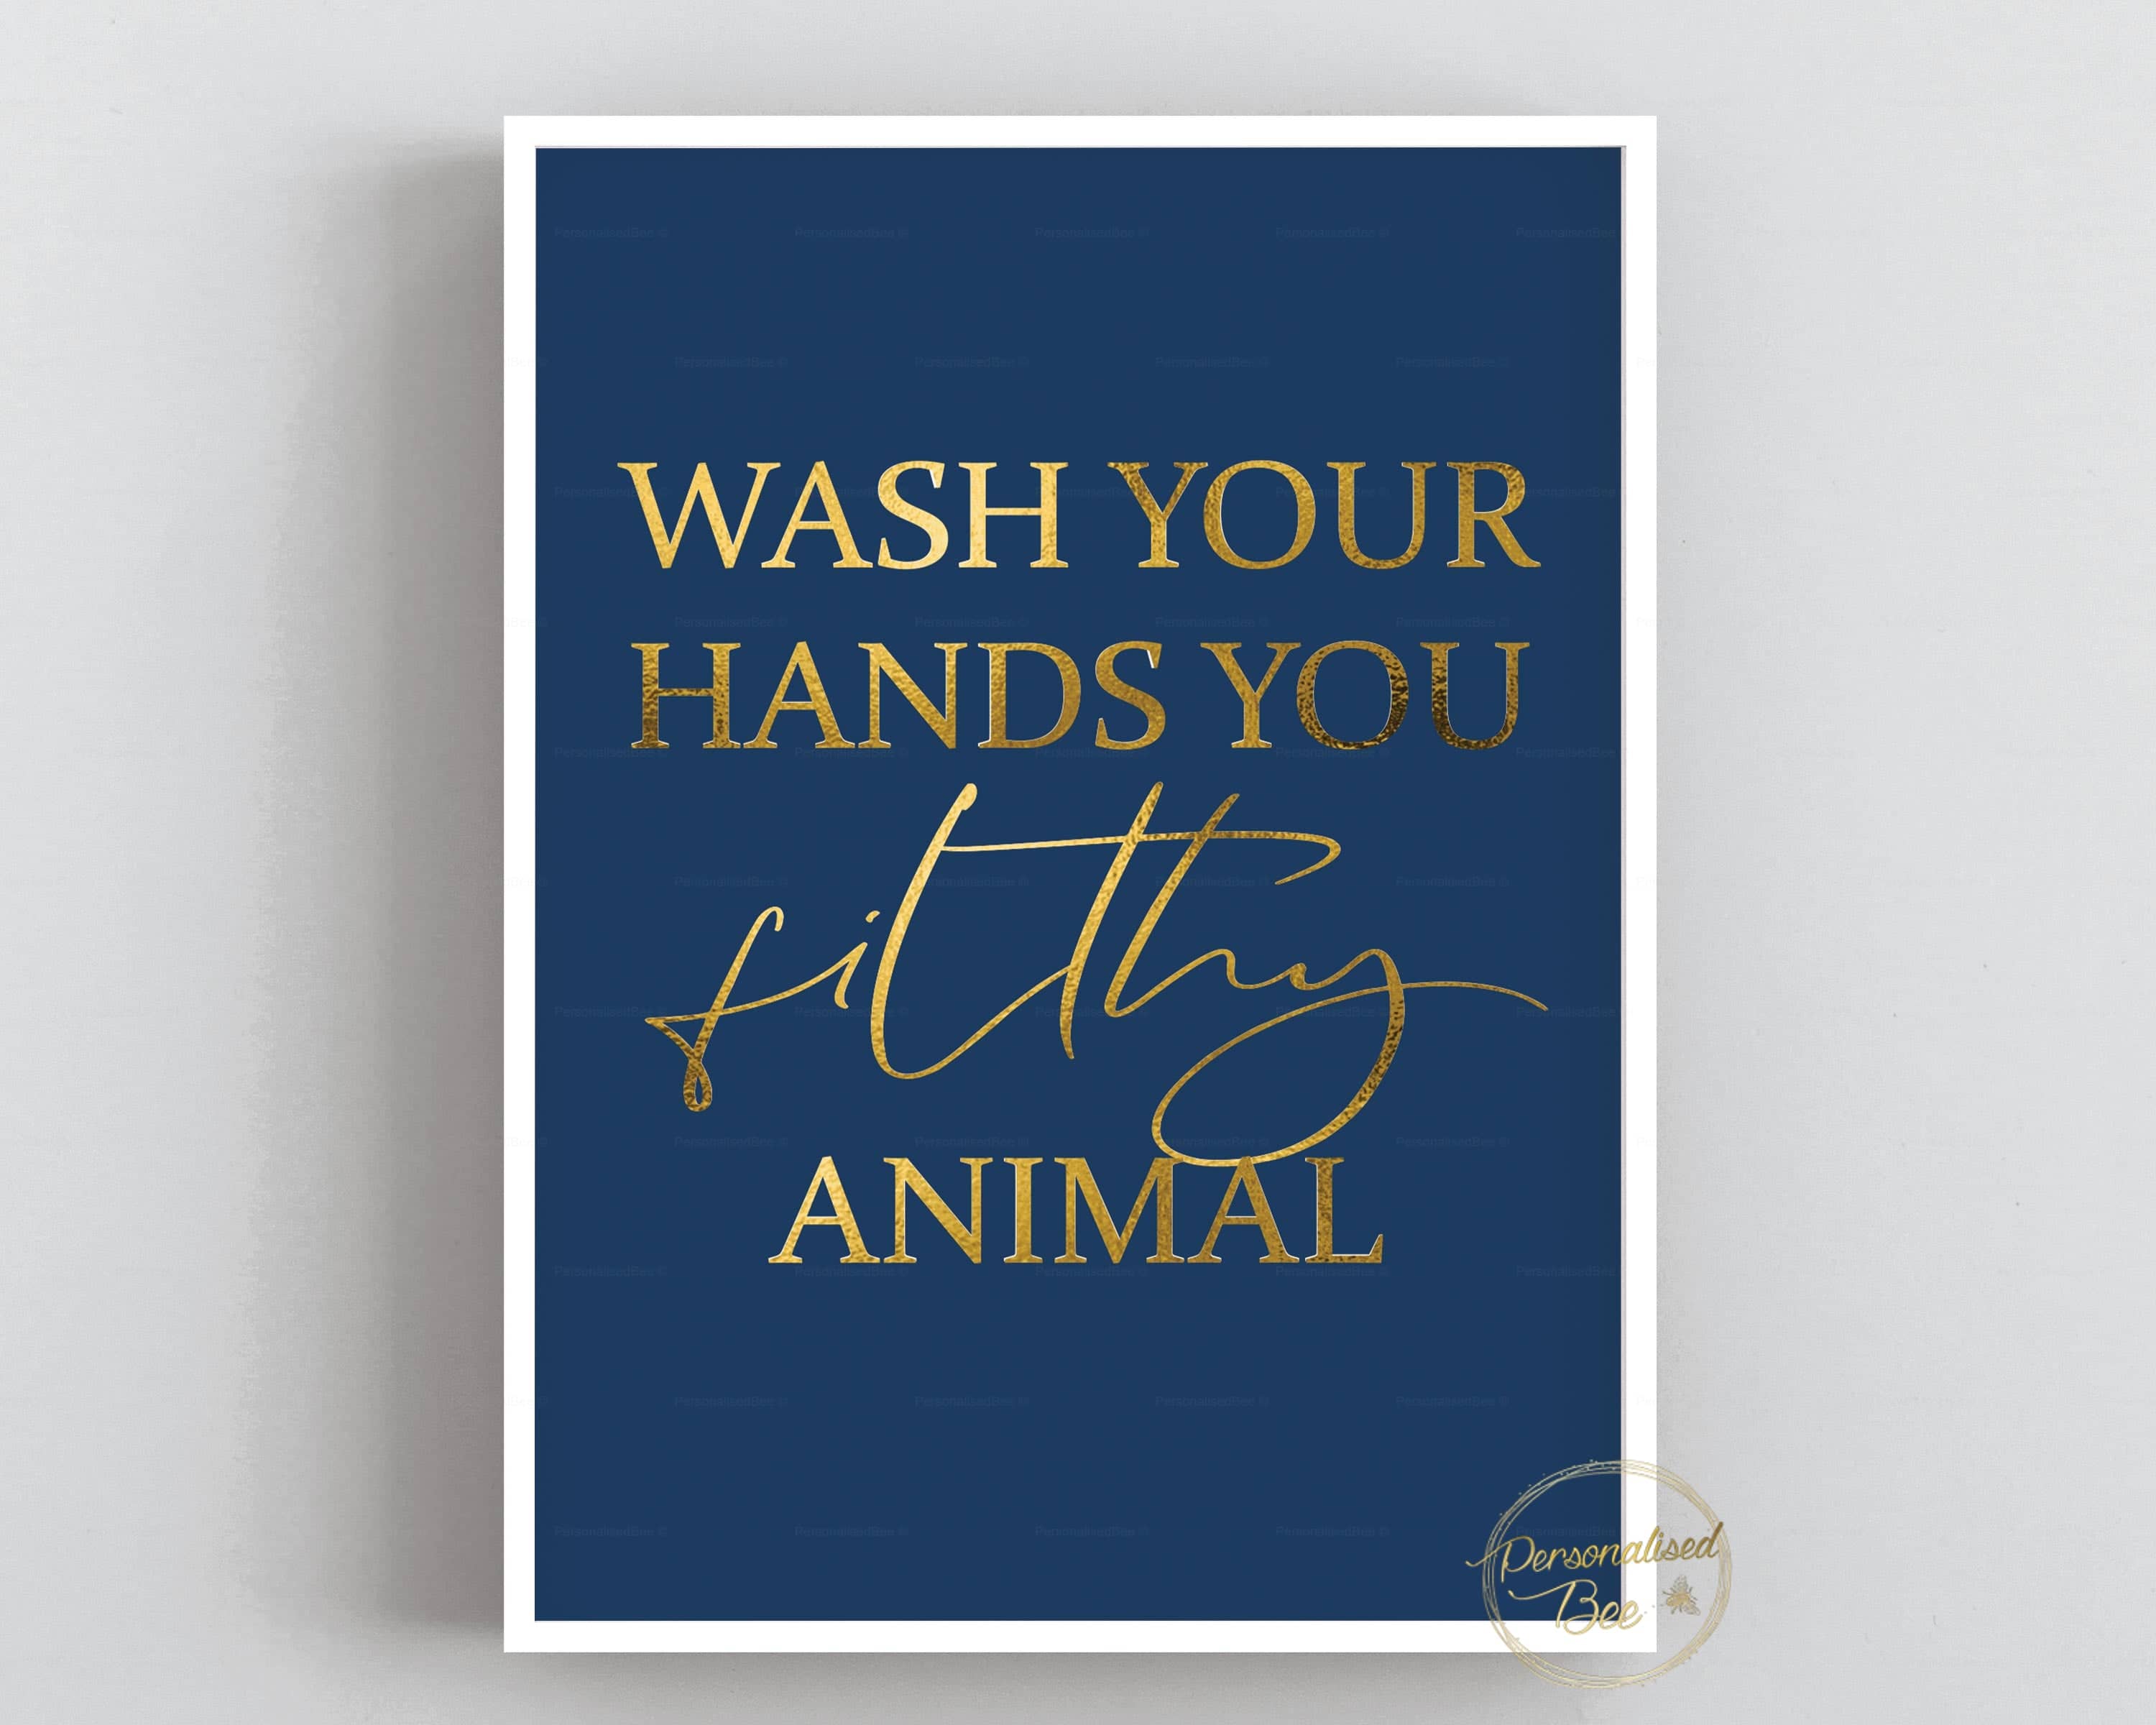 Wash Your Hands You Filthy Animal Quote Print -  Navy Blue & Gold.